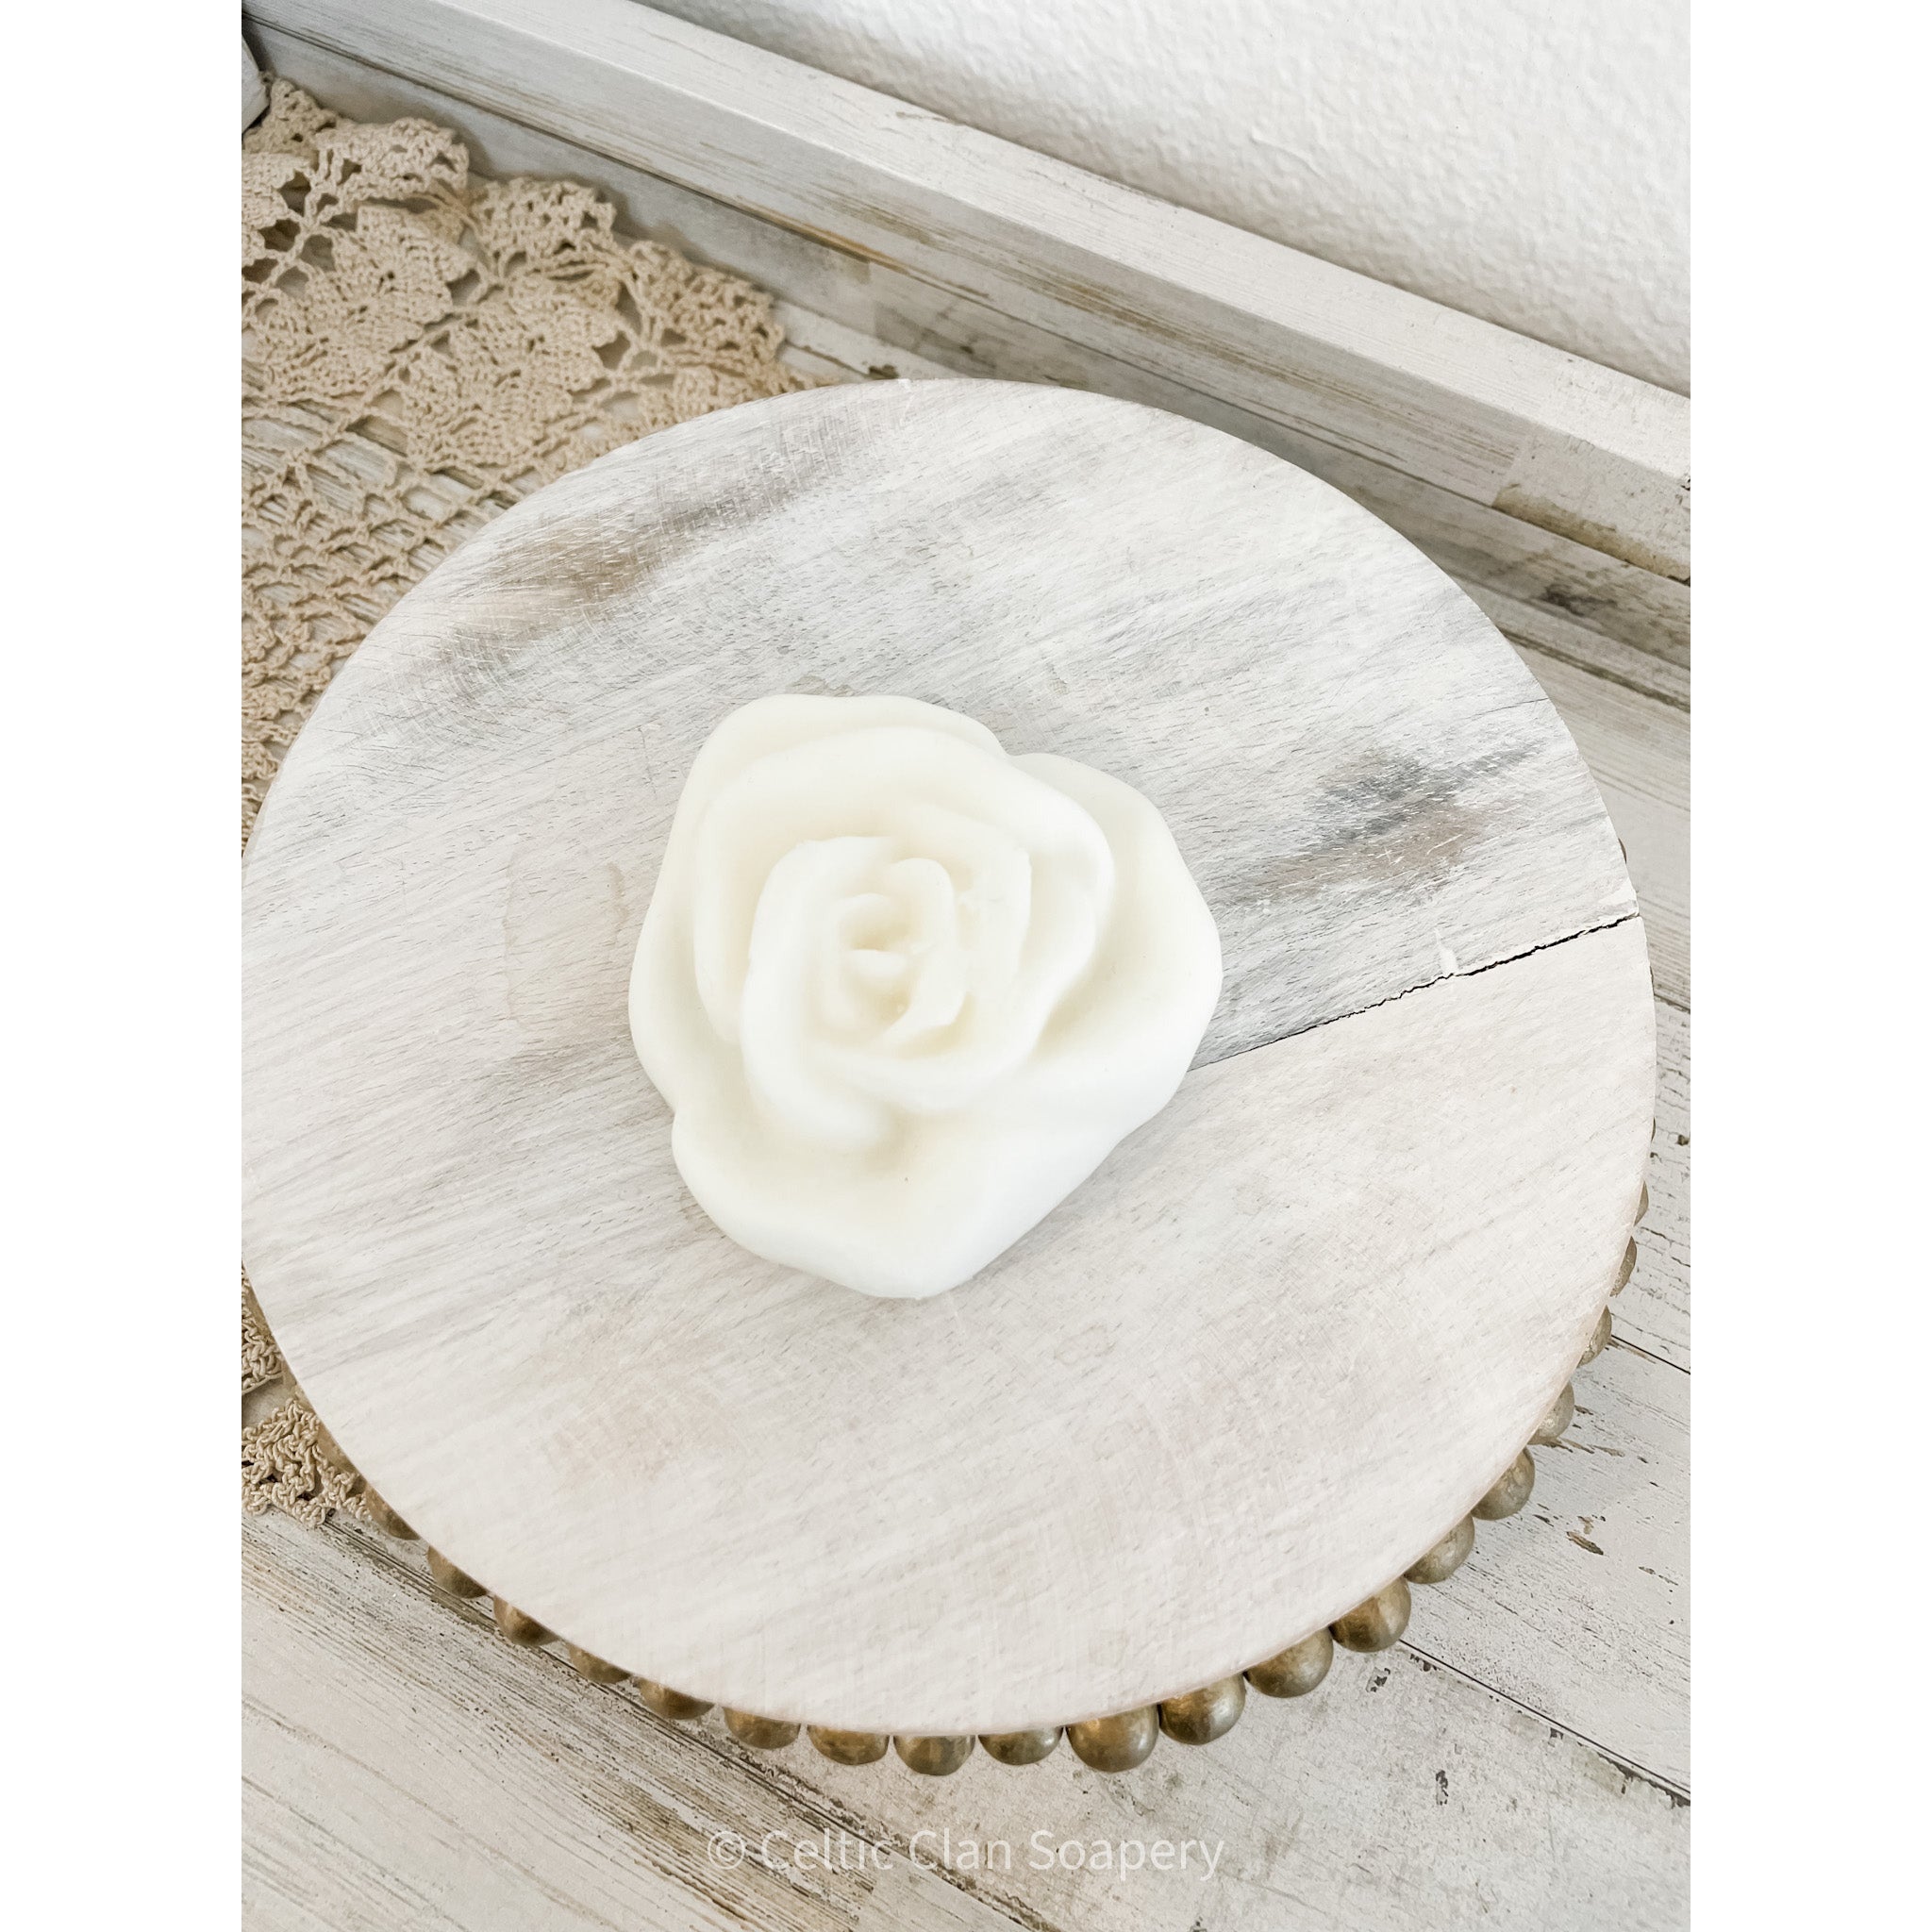 Argan Oil Solid Lotion Bars | Fragranced or Unscented | Sustainable Zero Waste | Refillable Tins